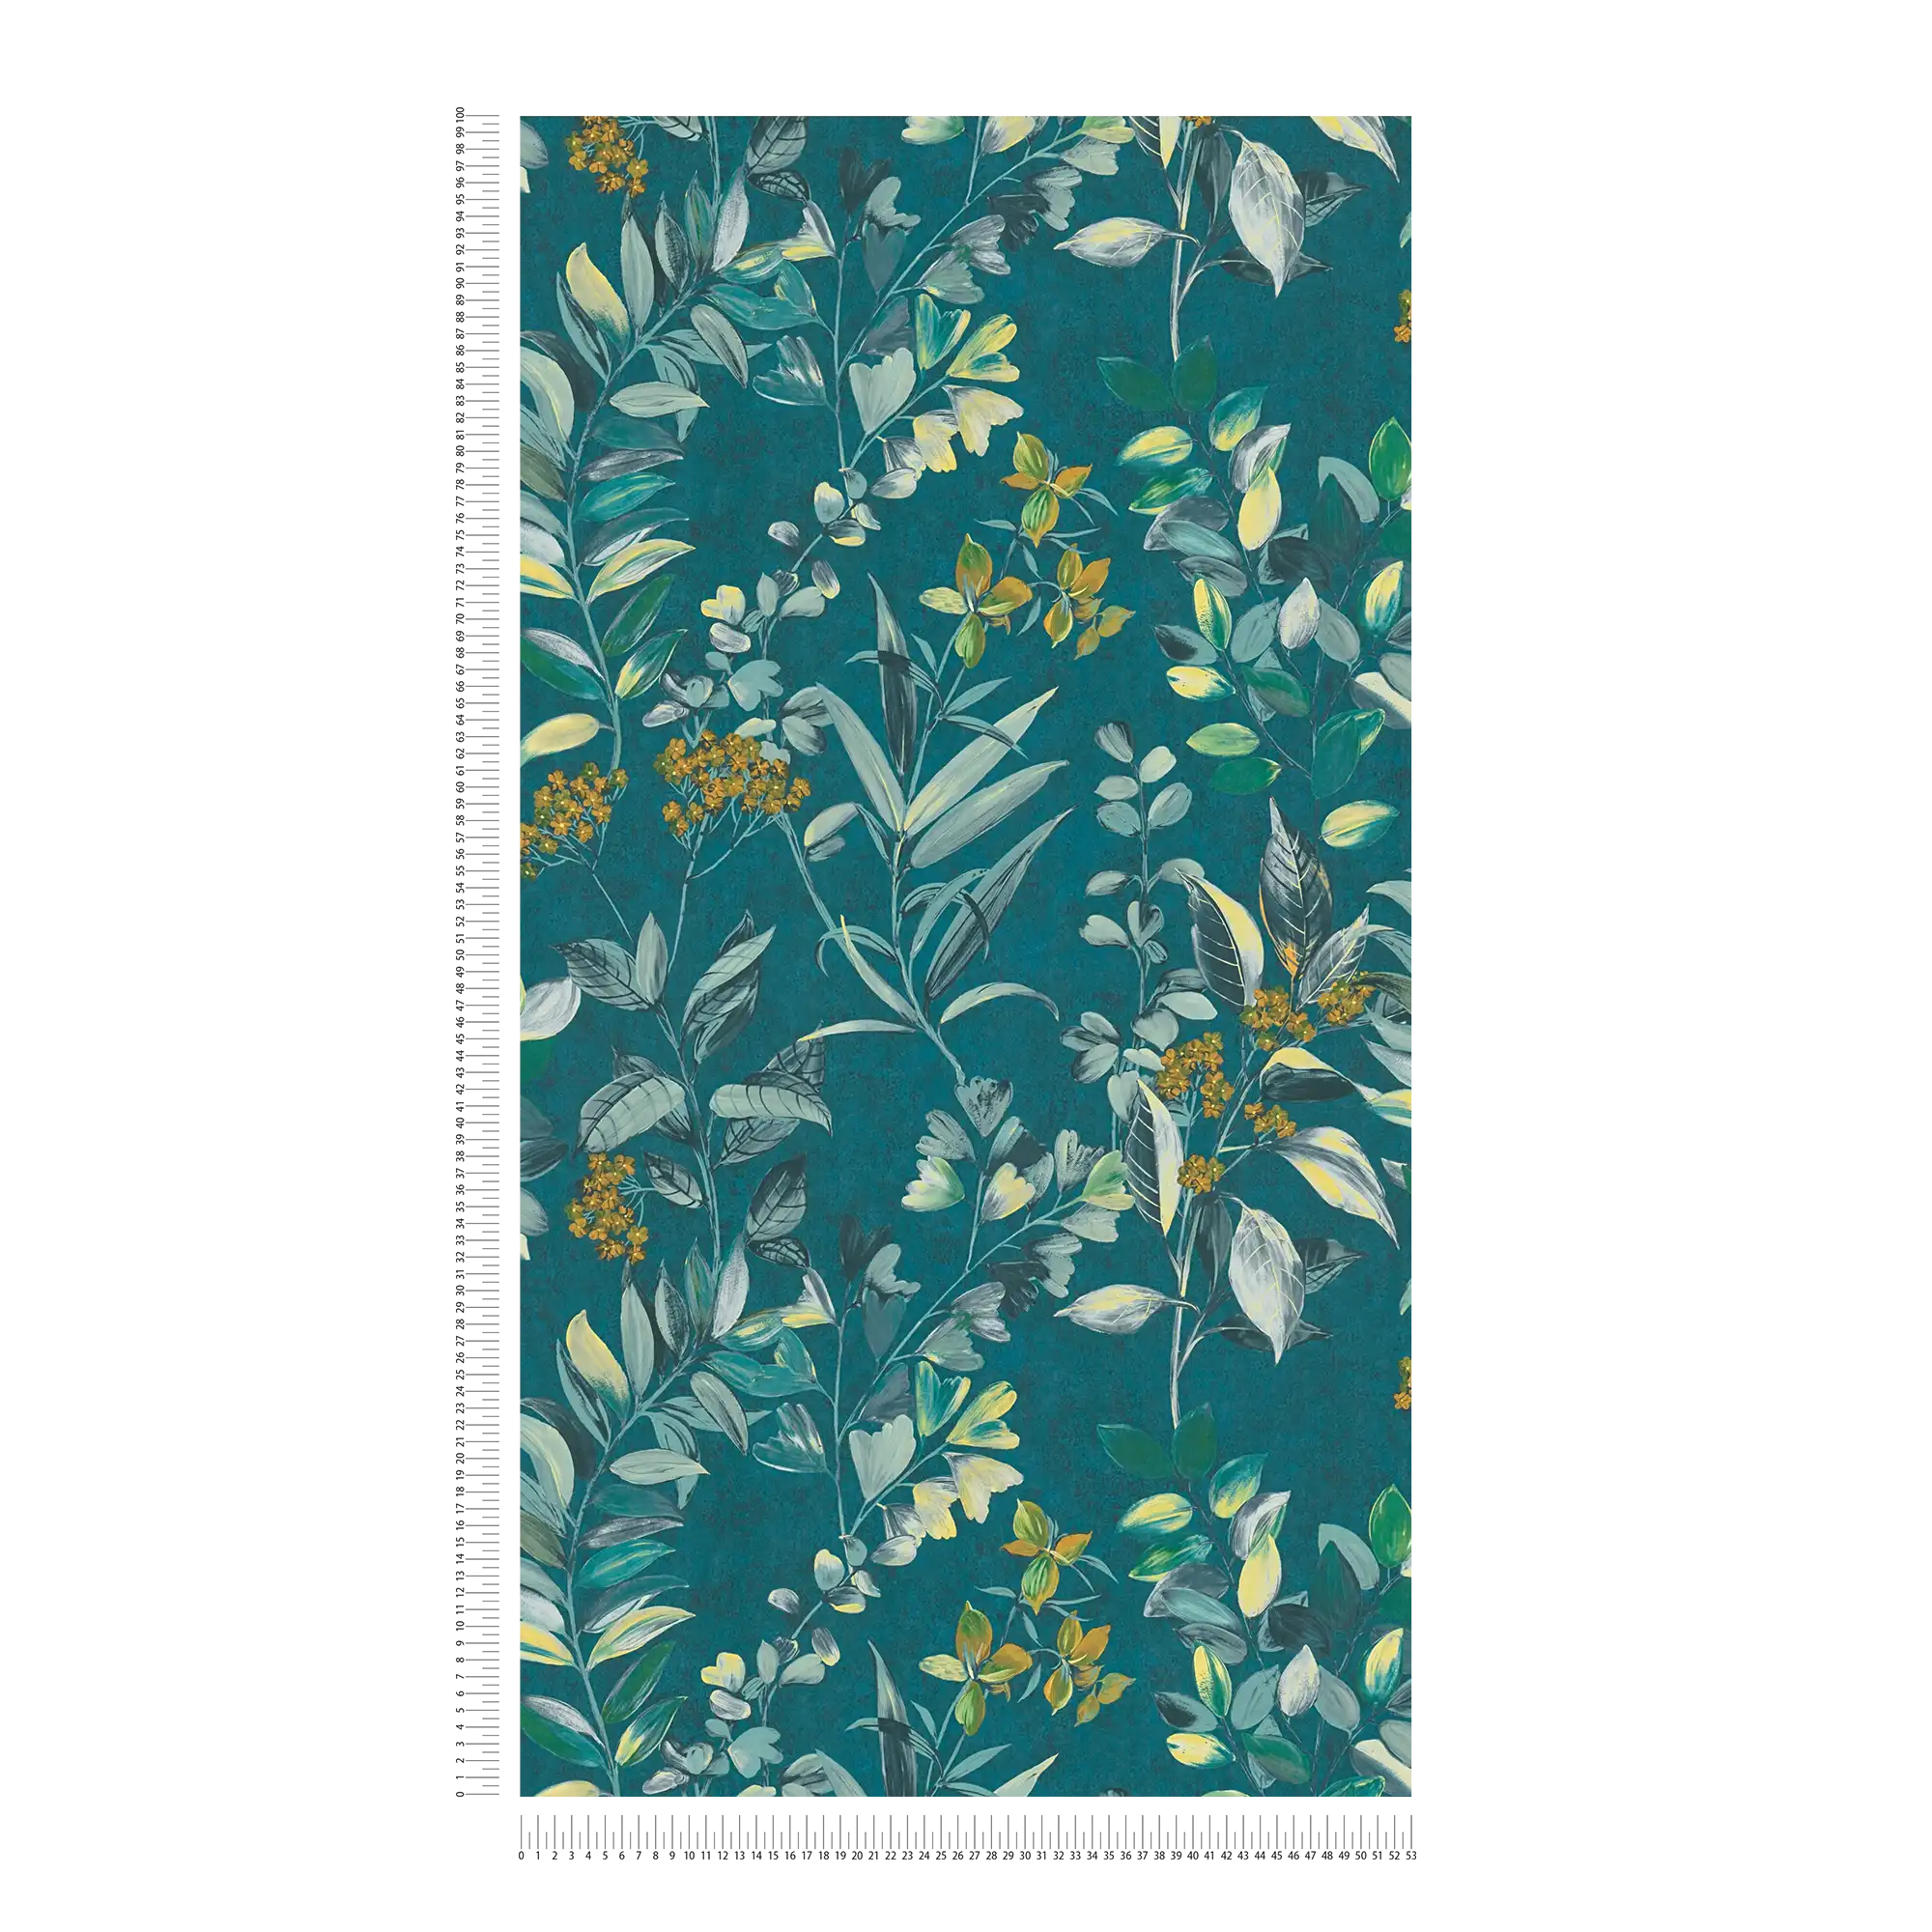             Floral non-woven wallpaper with floral pattern - multicoloured, petrol, yellow
        